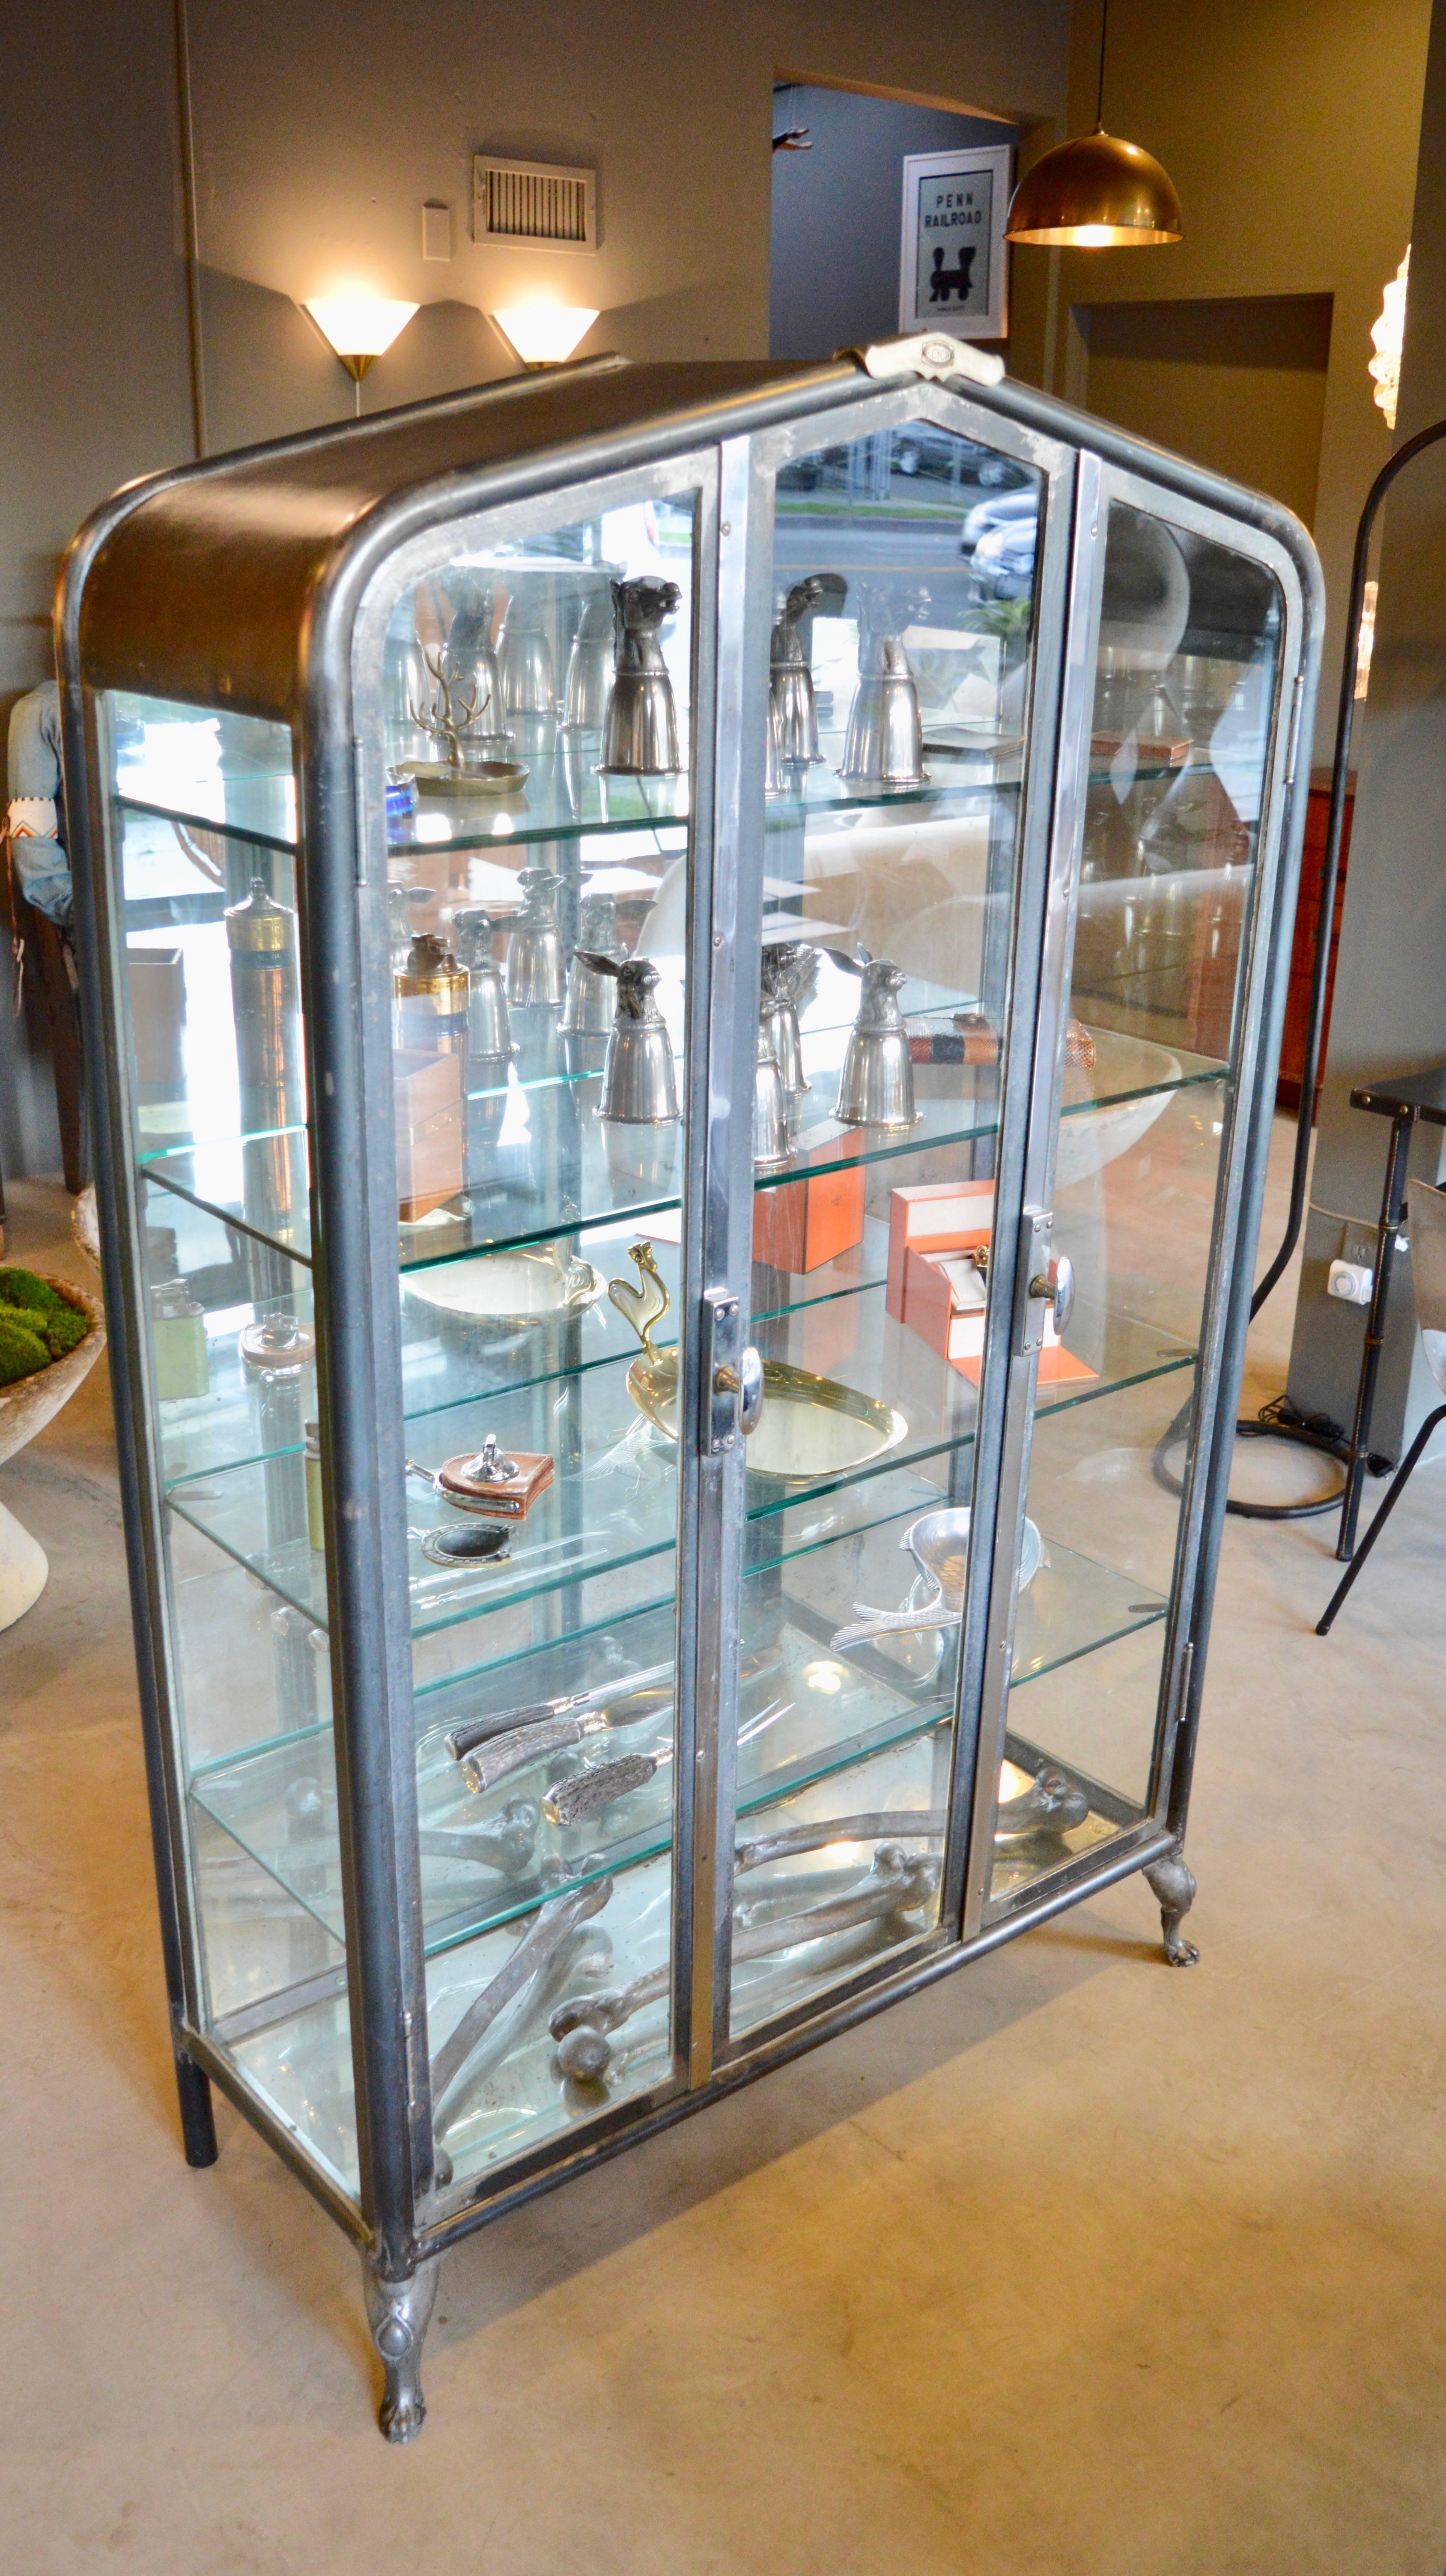 Incredible metal and glass vitrine from Argentina, circa 1930. Marked "ECYCA" Impressive shape and design. Very sturdy and heavy. In excellent condition. All original glass frame with newly made glass shelves. Two doors open on either side